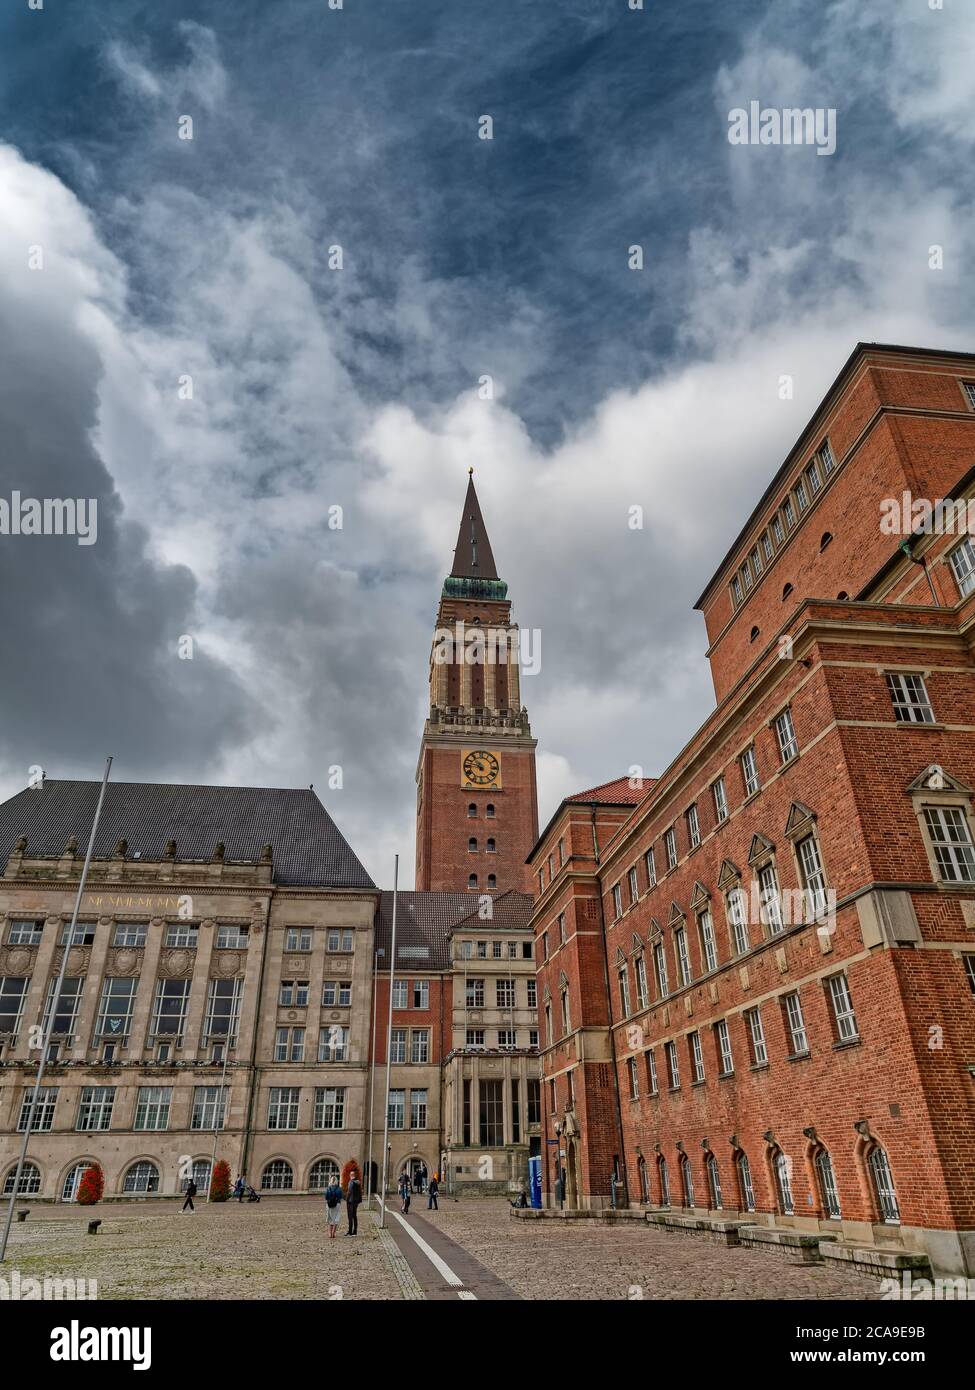 The old city town hall in Kiel, Germany Stock Photo